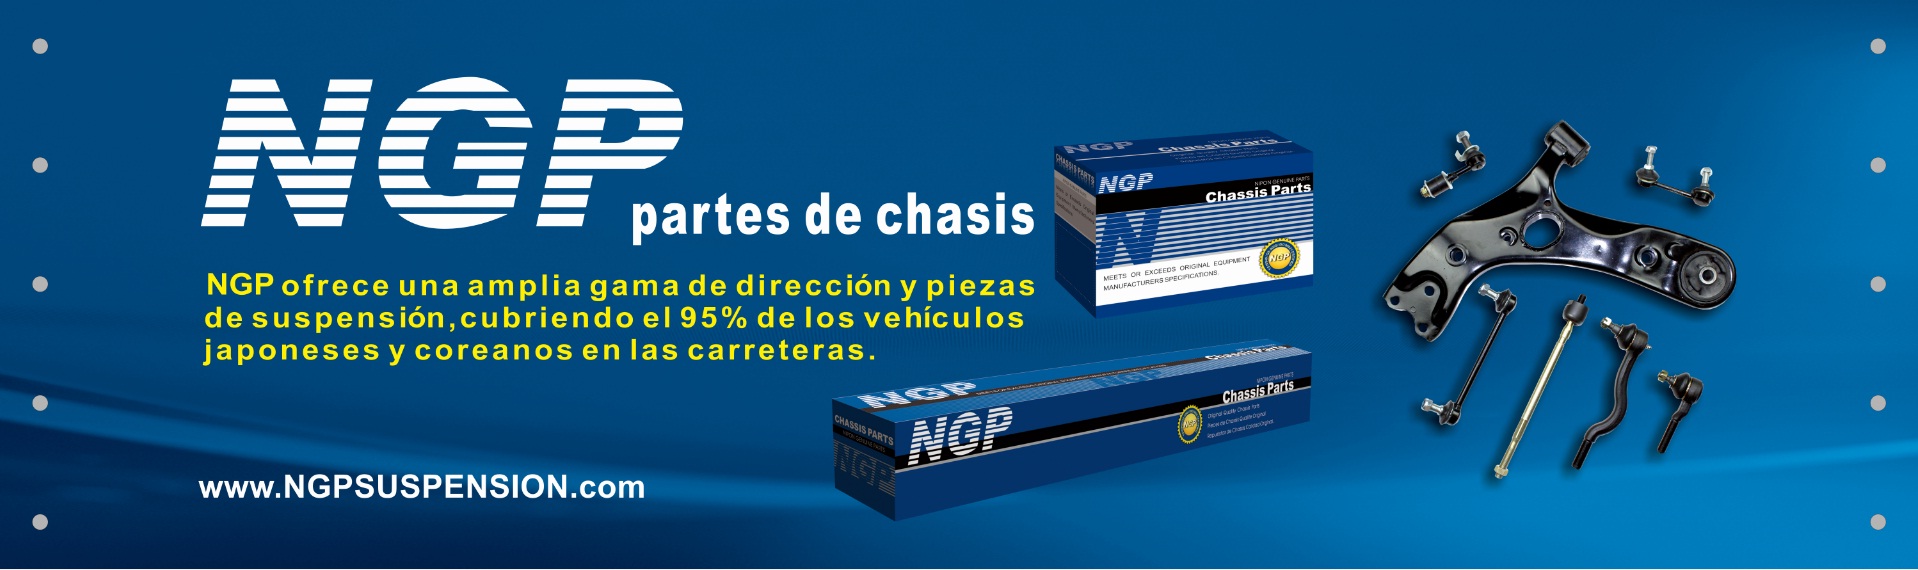 PRO71621(ES)
                                - NGP BANNER 24X80INCH
                                - Promotion
                                ....196582